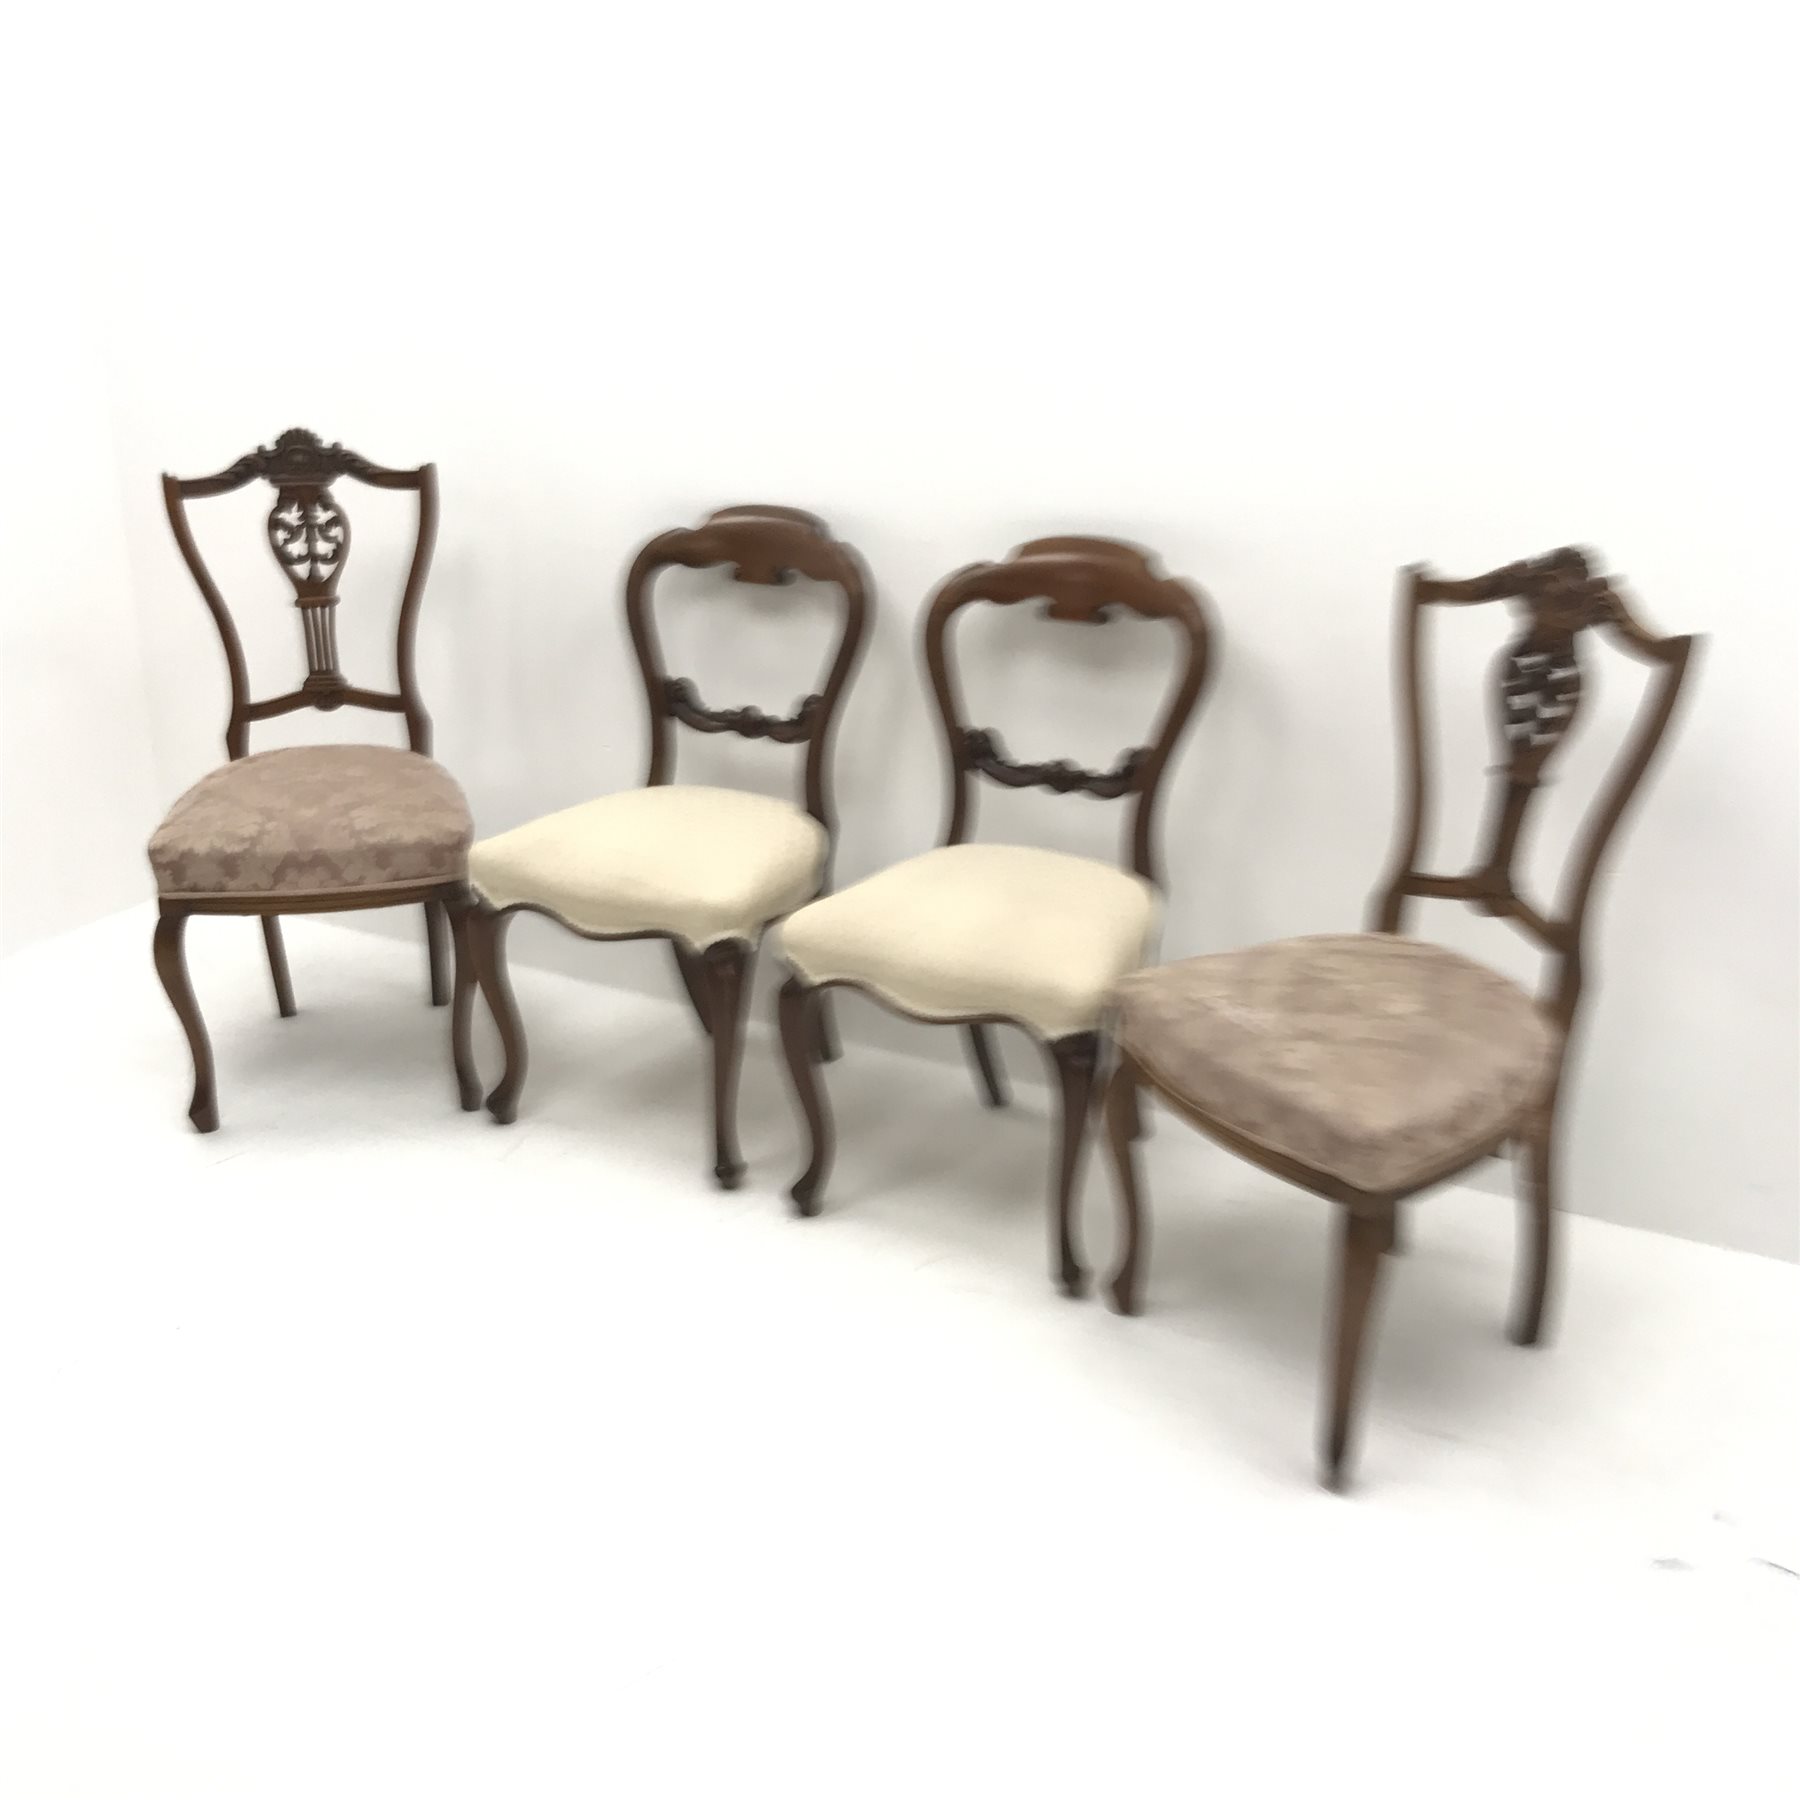 Two Victorian mahogany chairs with upholstered seats (W49cm) and two Edwardian mahogany salon chair - Image 3 of 3